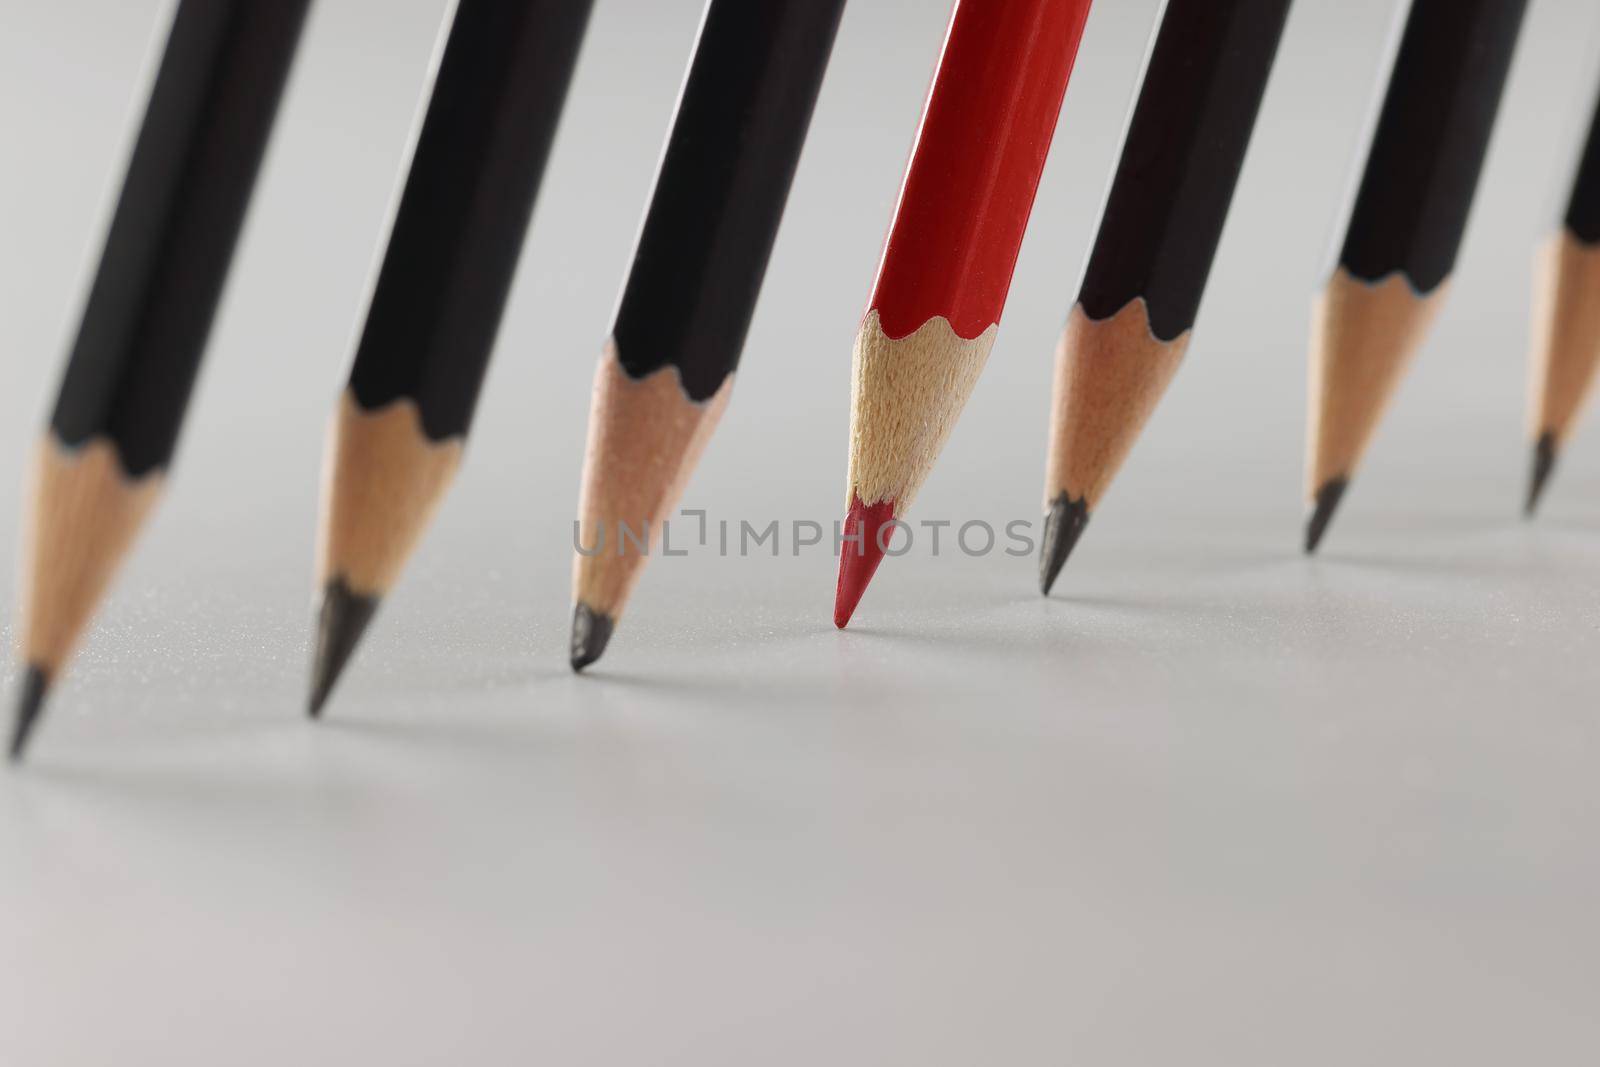 Red sharp slate pencil among black pencils in a row on a gray background. The concept of individuality, outstanding ability